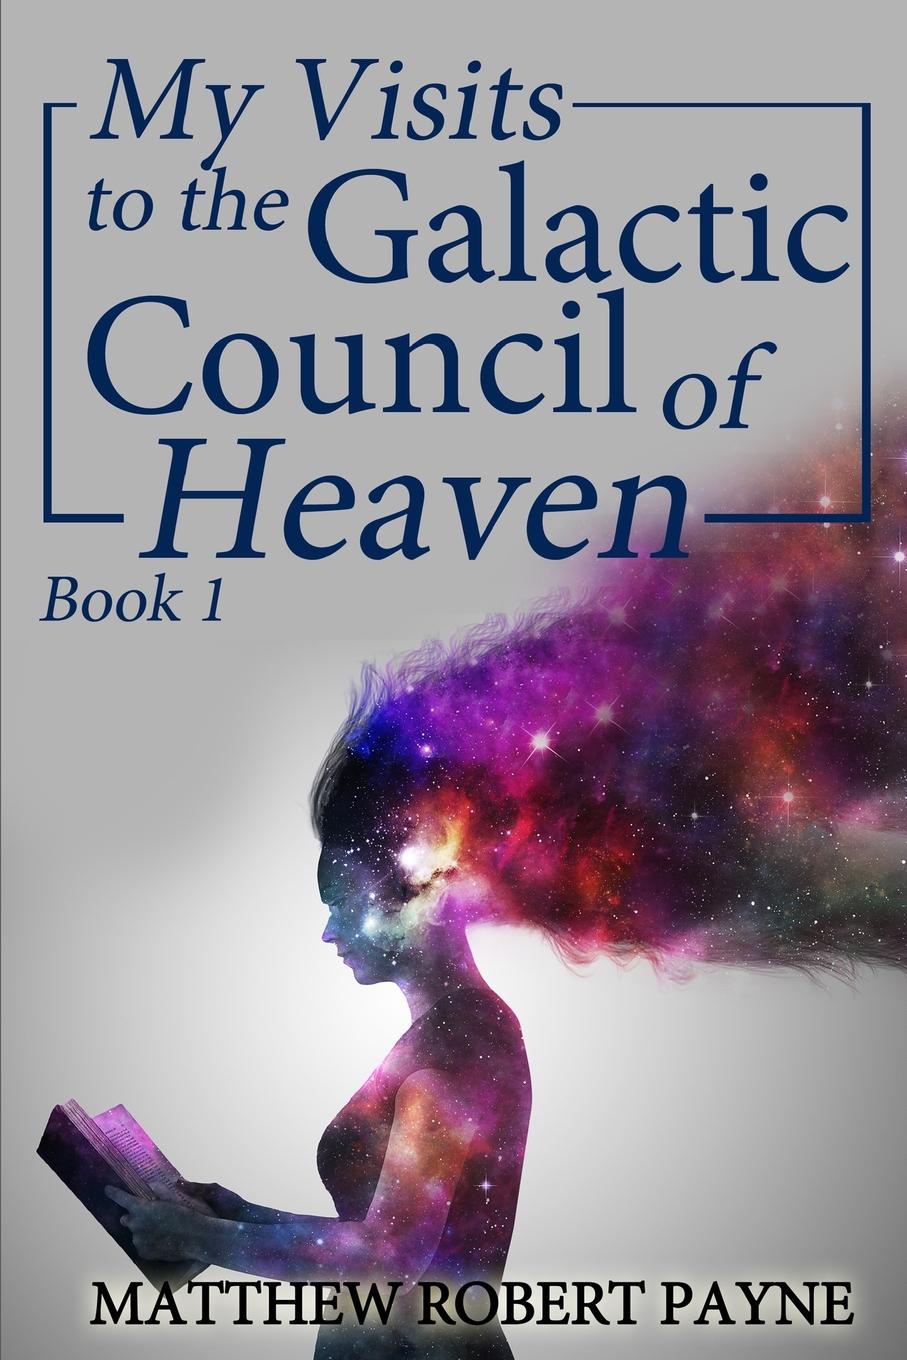 My Visits to the Galactic Council of Heaven. Book 1